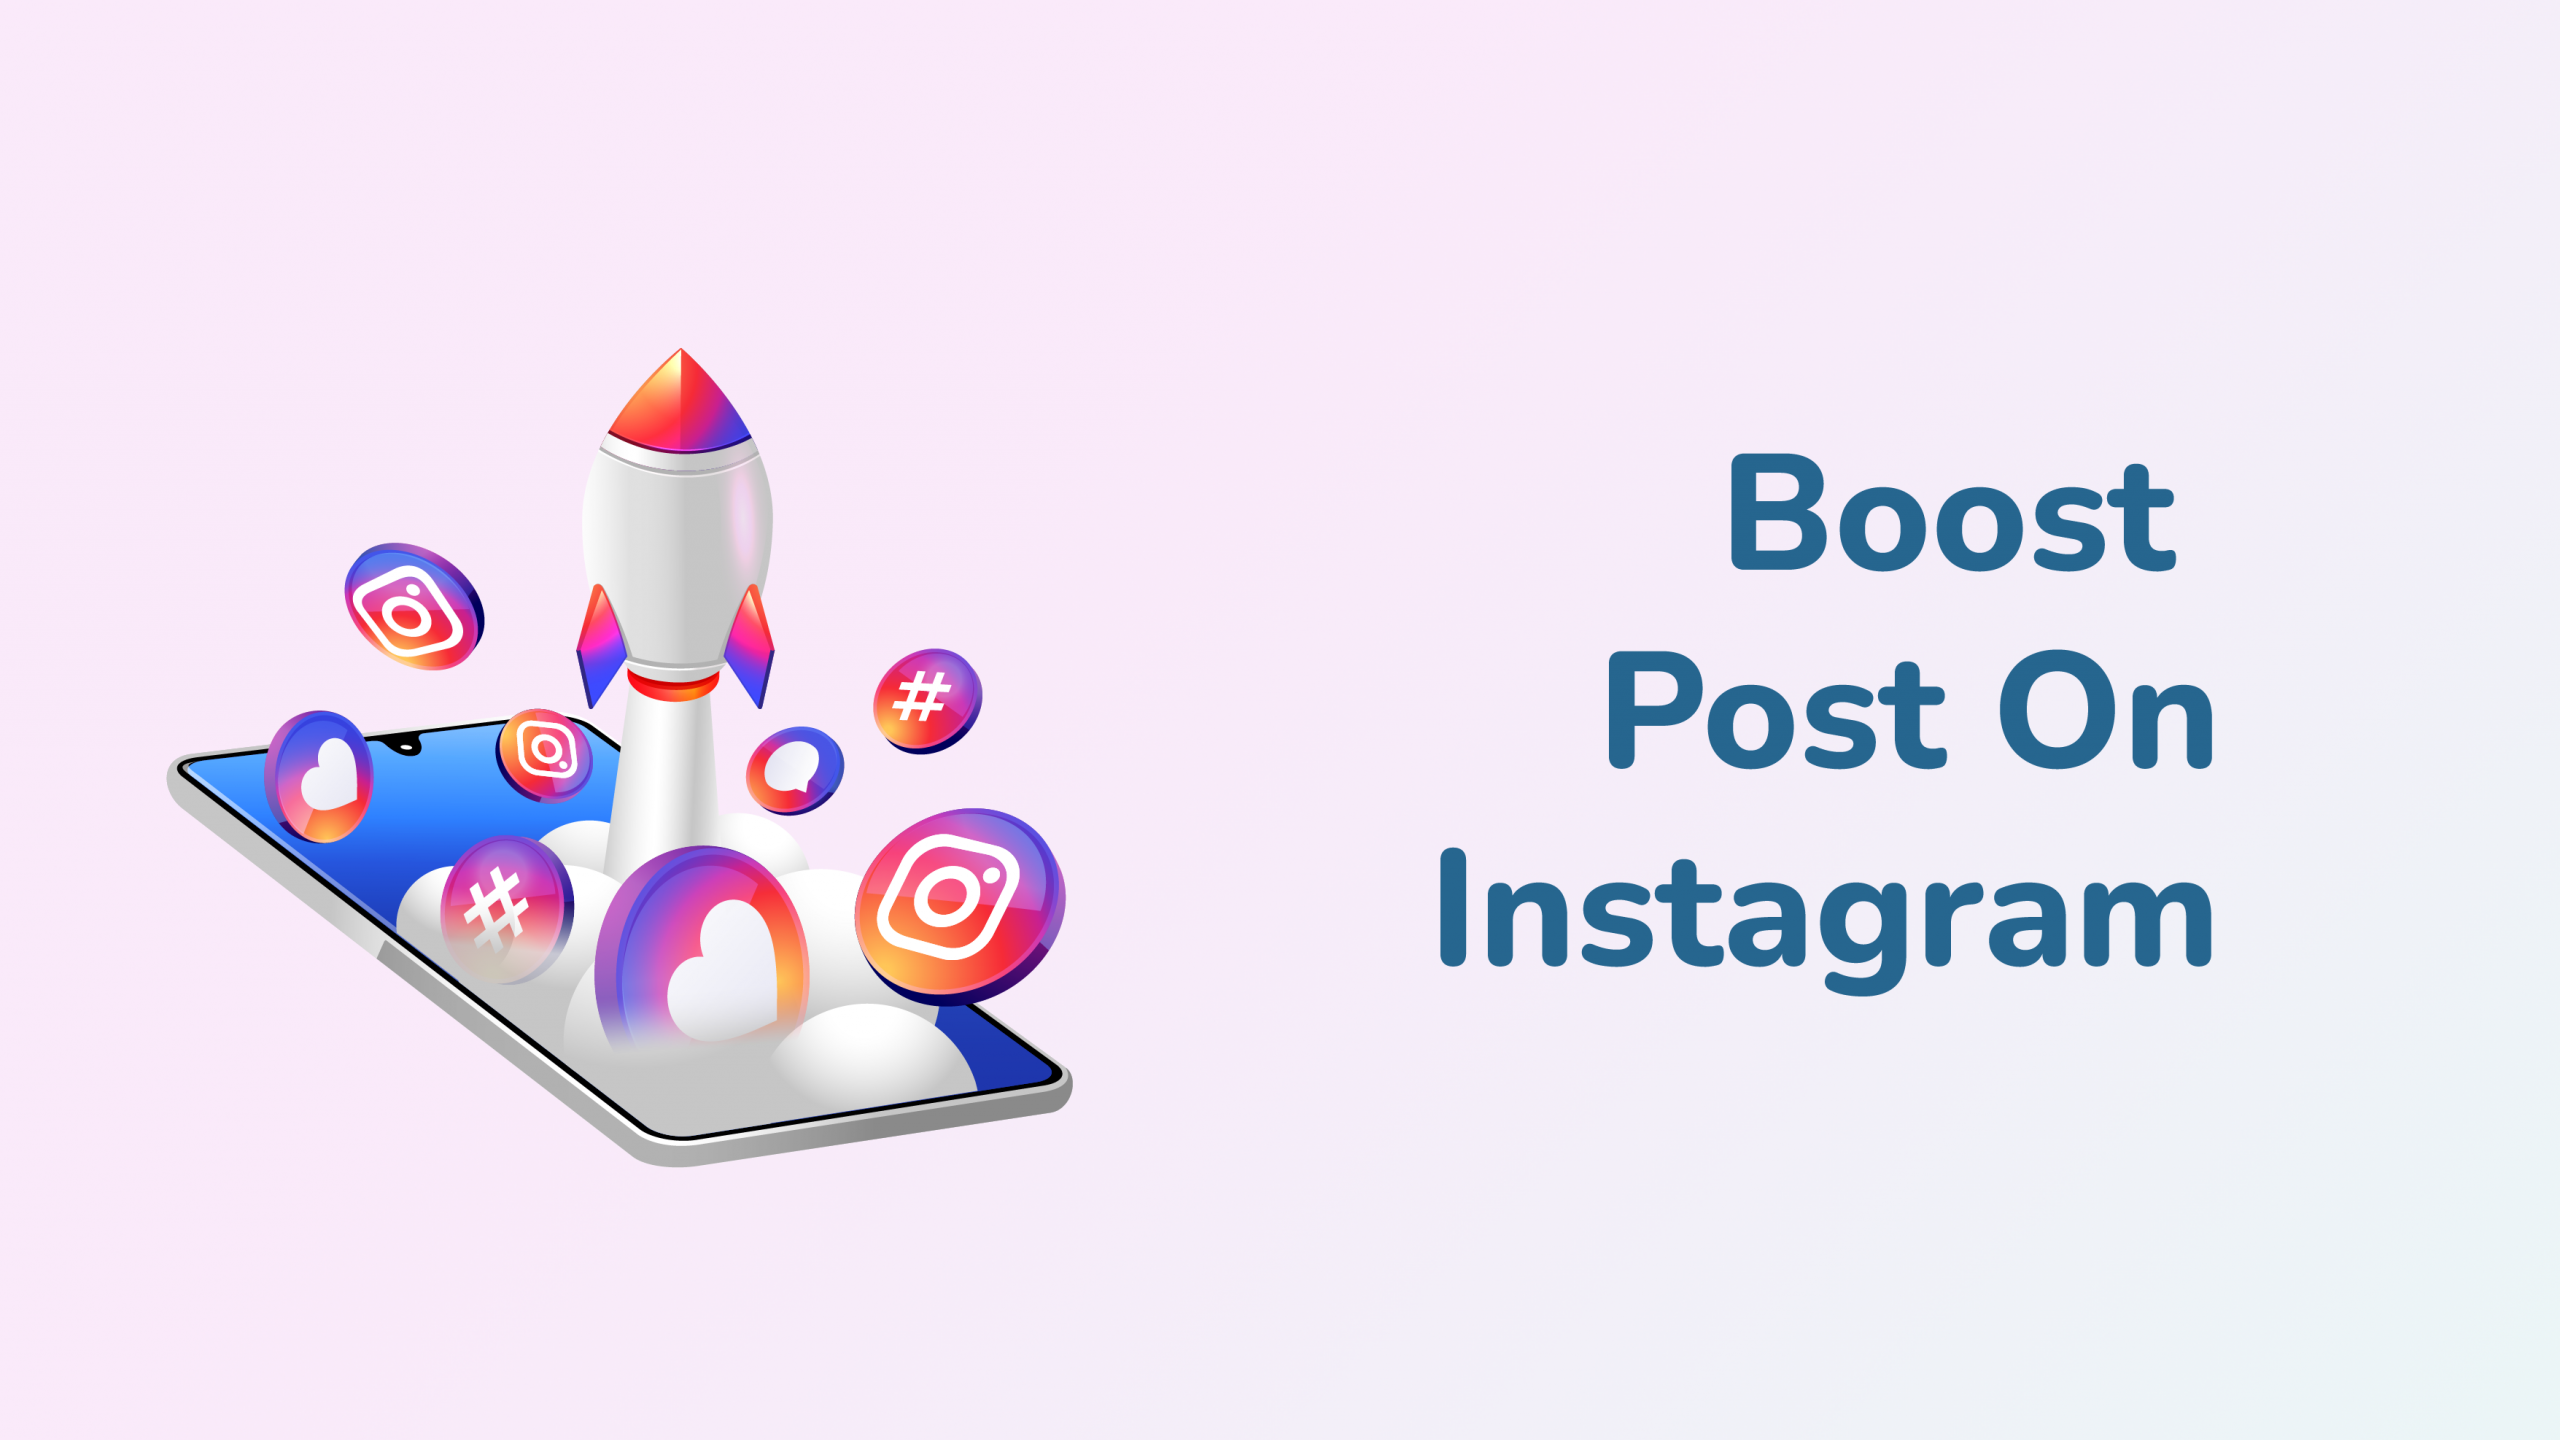 What Does Boost Post Mean On Instagram